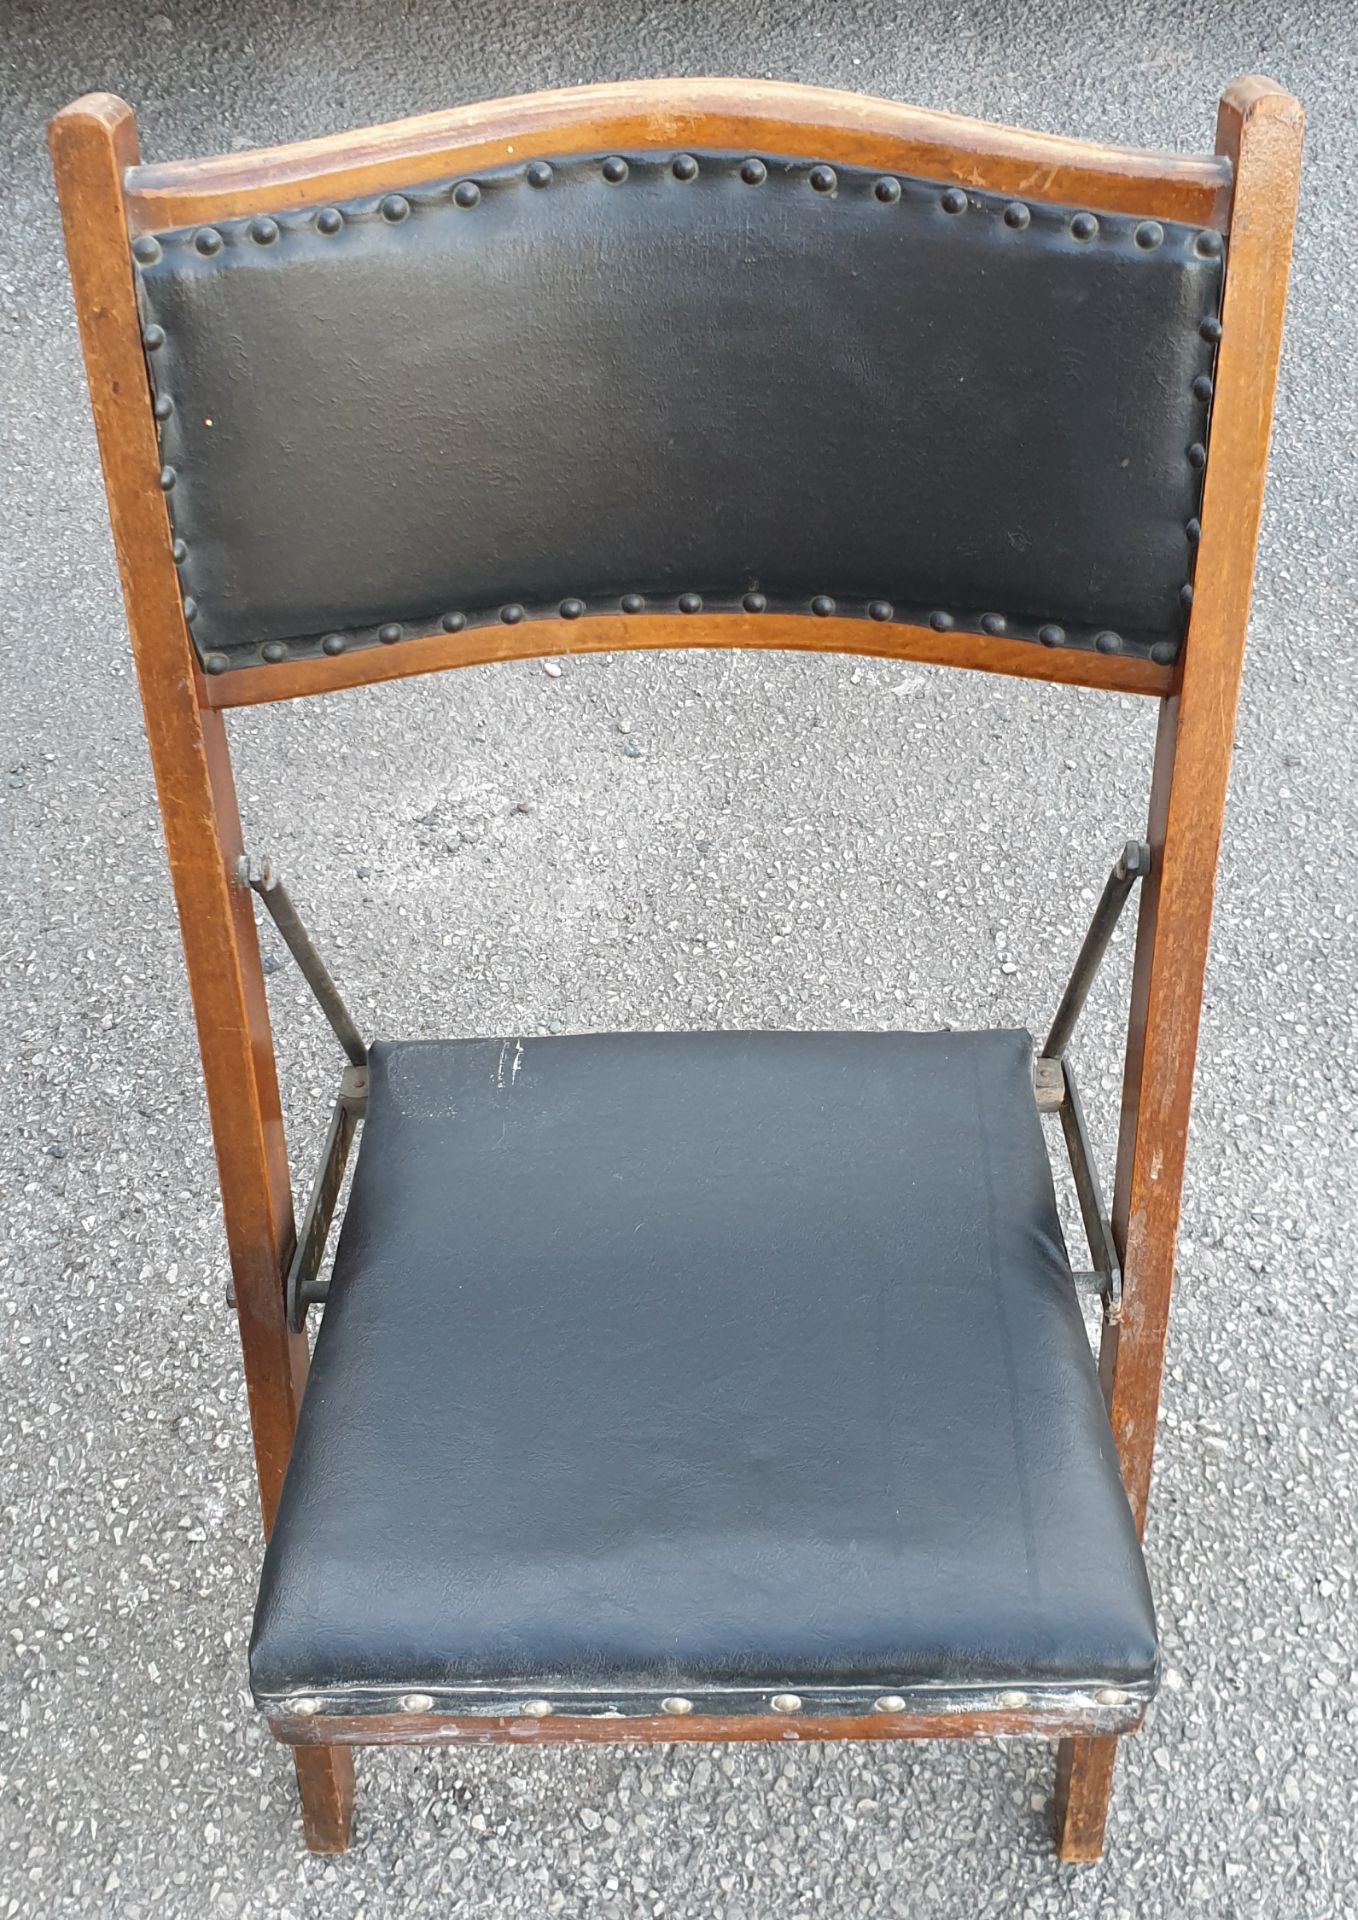 Antique Stakmore Folding Chair